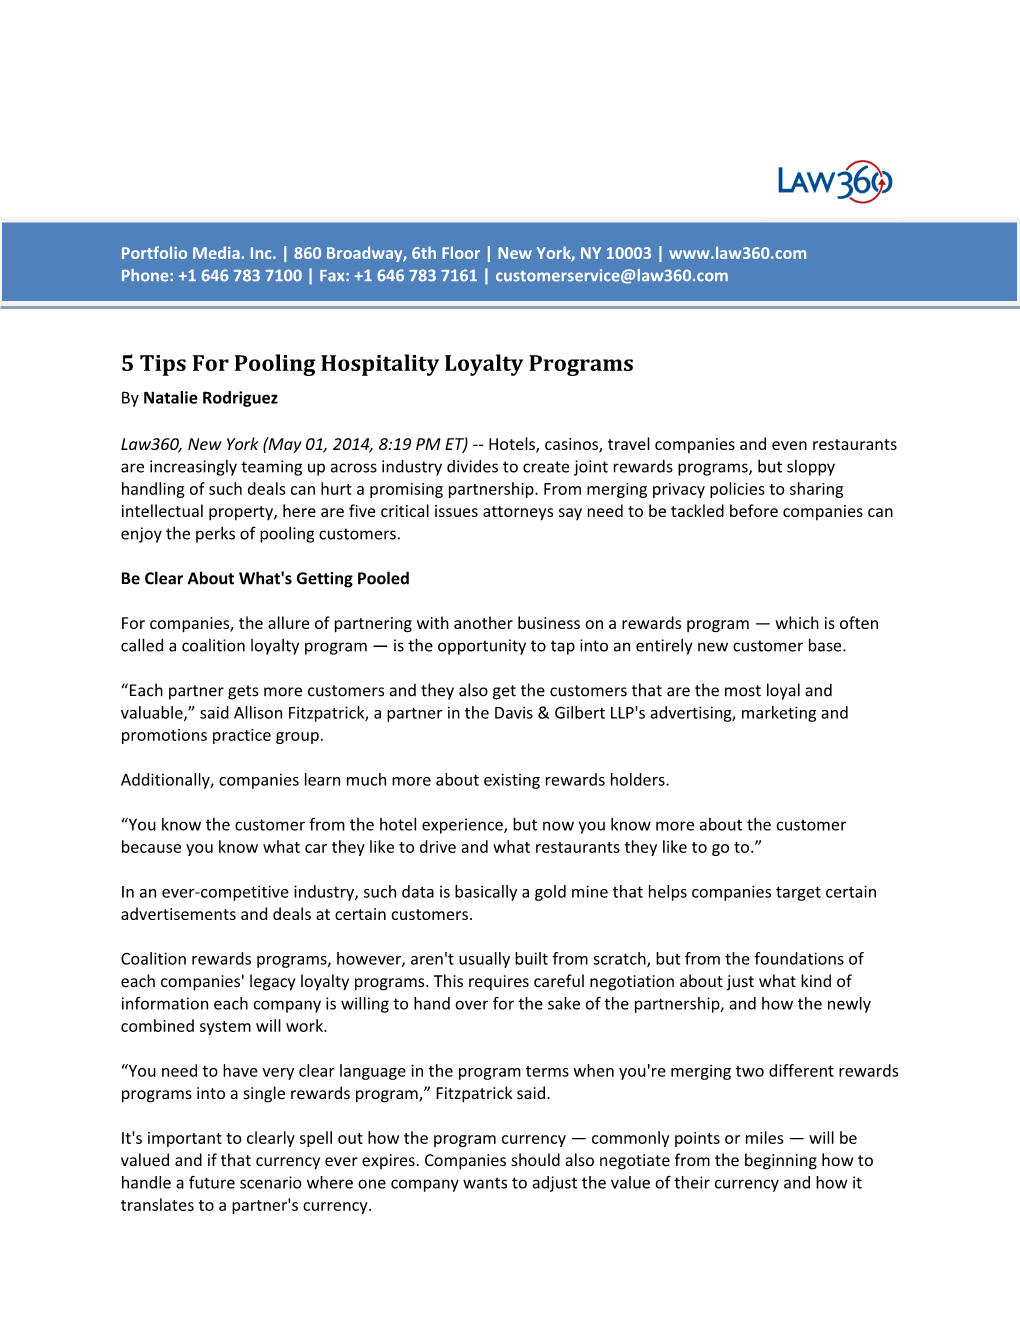 5 Tips for Pooling Hospitality Loyalty Programs by Natalie Rodriguez